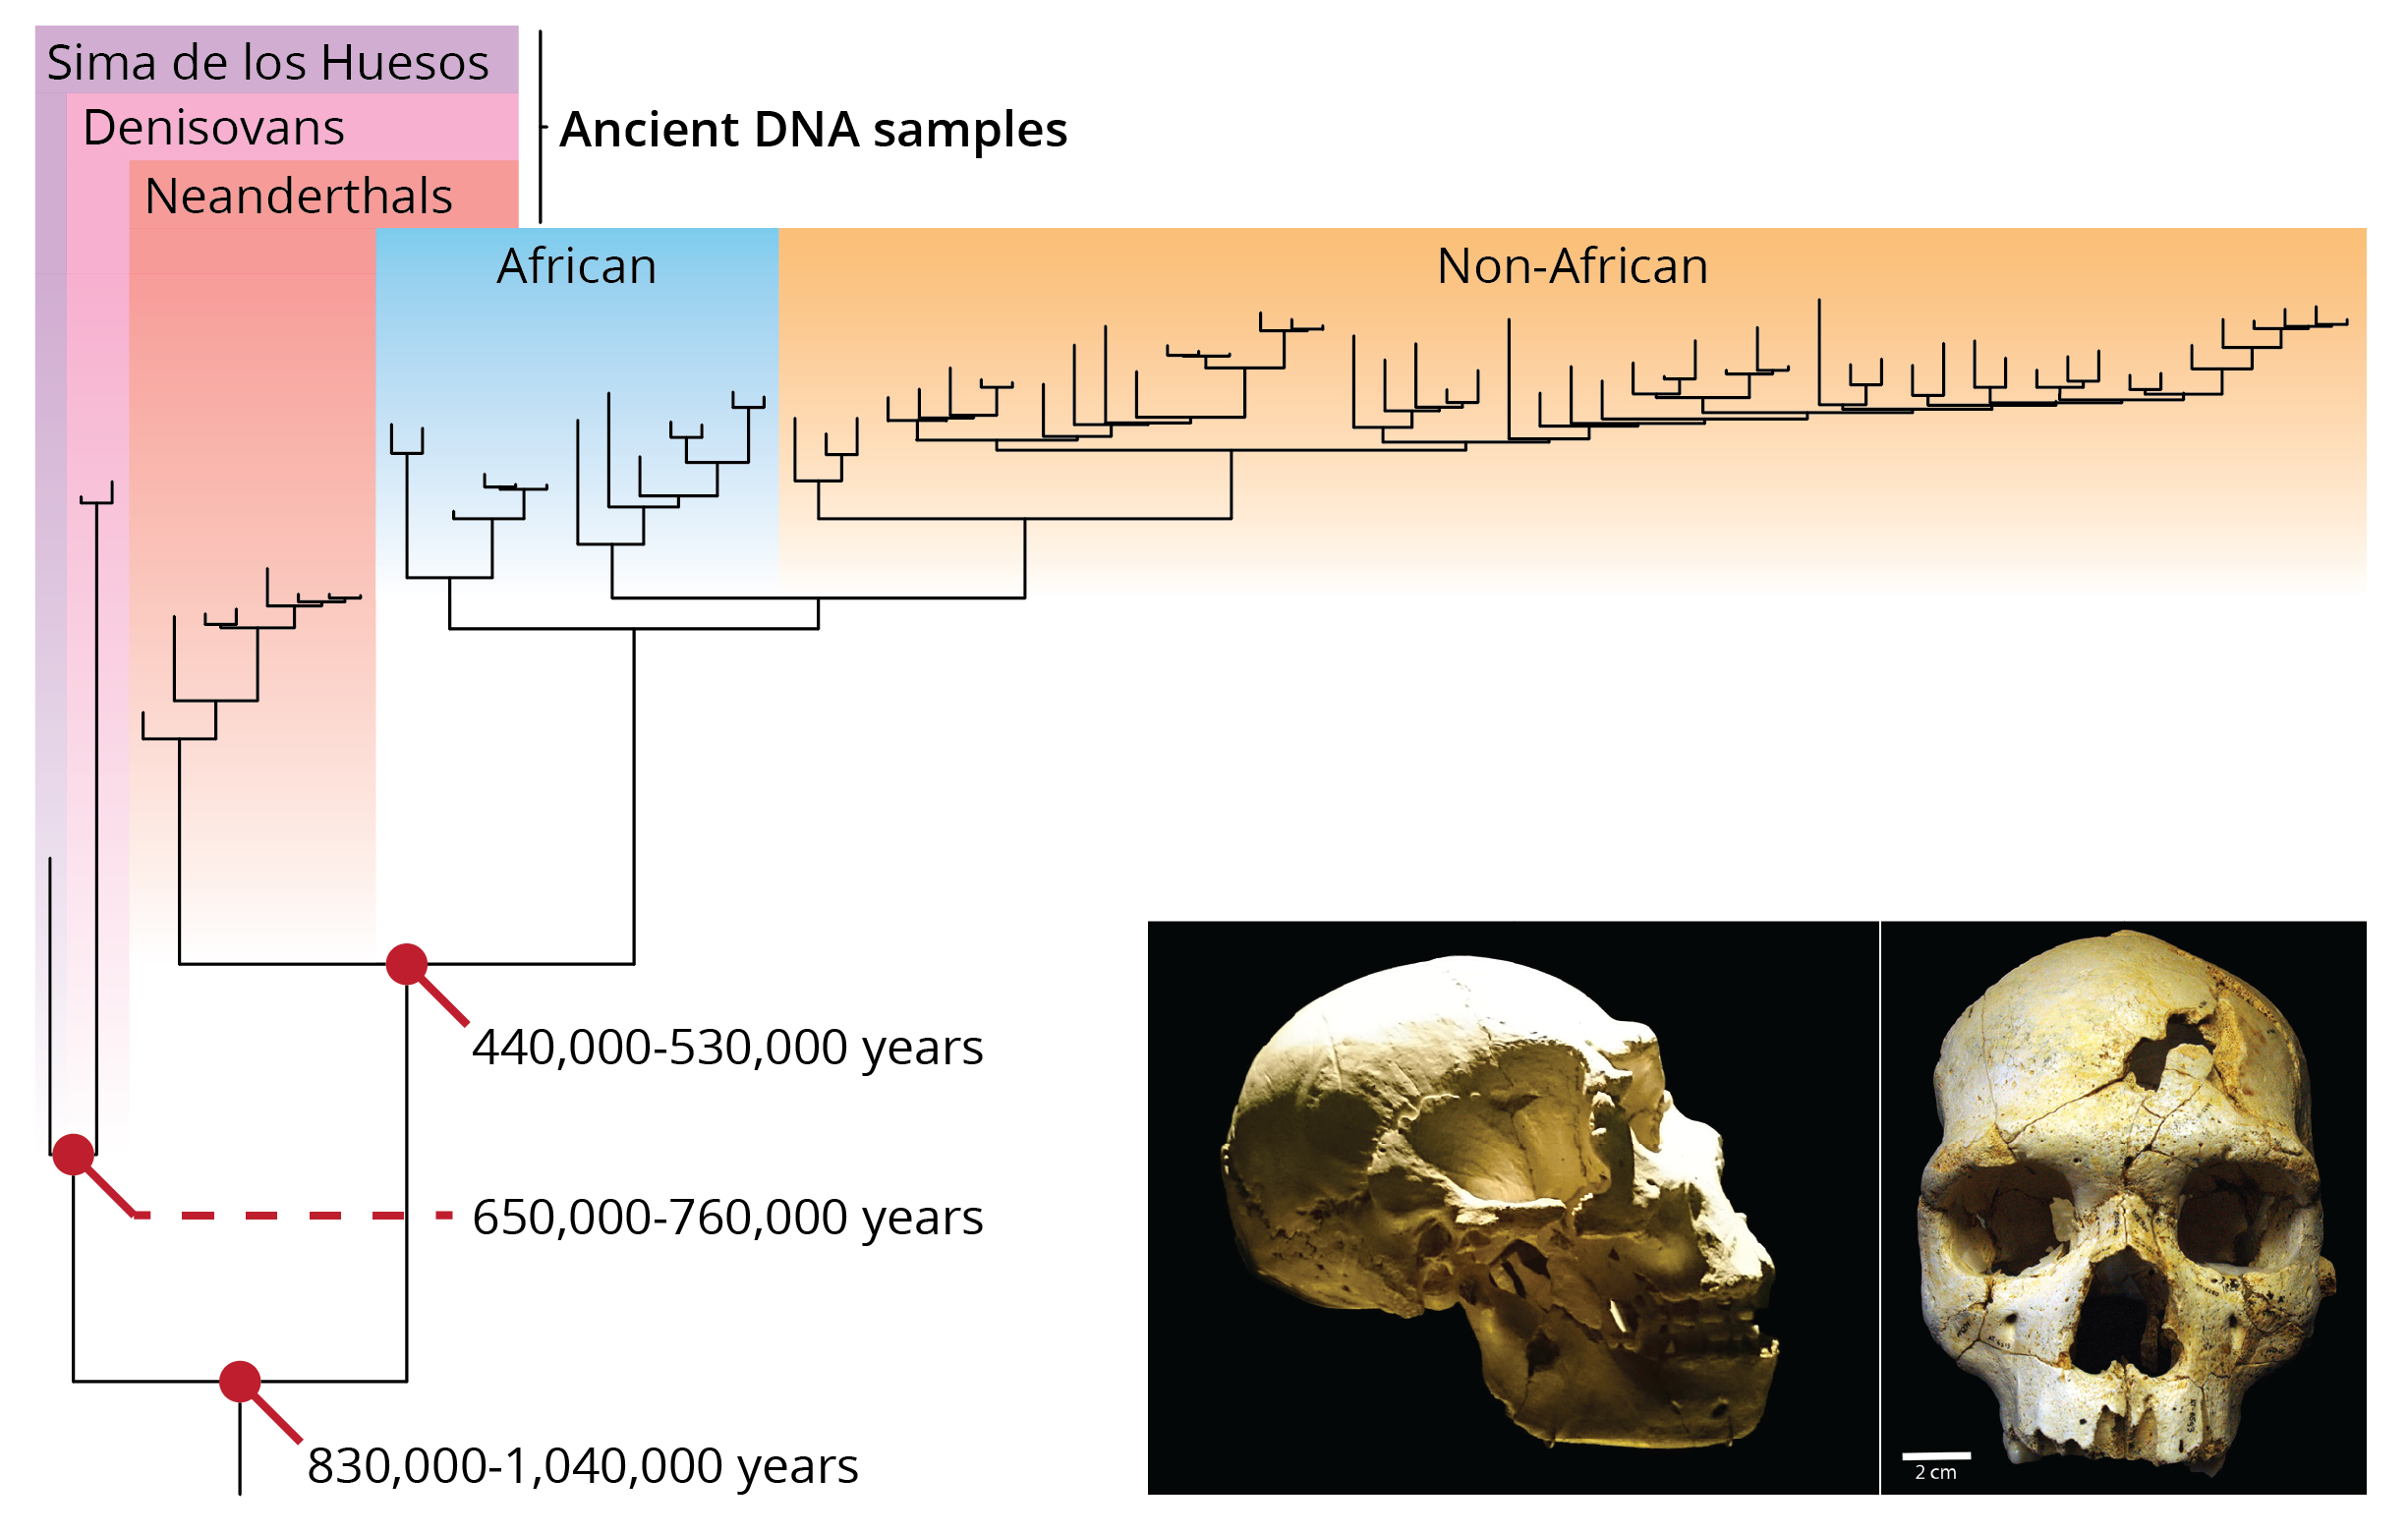 Phylogeny modern humann and pre-modern *Homo* for which we have ancient DNA available. This tree was derived from mitochondrial genome sequences and includes divergence time estimates for critical nodes. Adopted from Meyer et al. (2014). Inserts show crania collected at Lima de los Huesos. Photo of lateral view by UtaUtaNapishtim, [CC BY-SA 4.0](https://creativecommons.org/licenses/by-sa/4.0), photo of frontal view from Sala et al. (2015). 